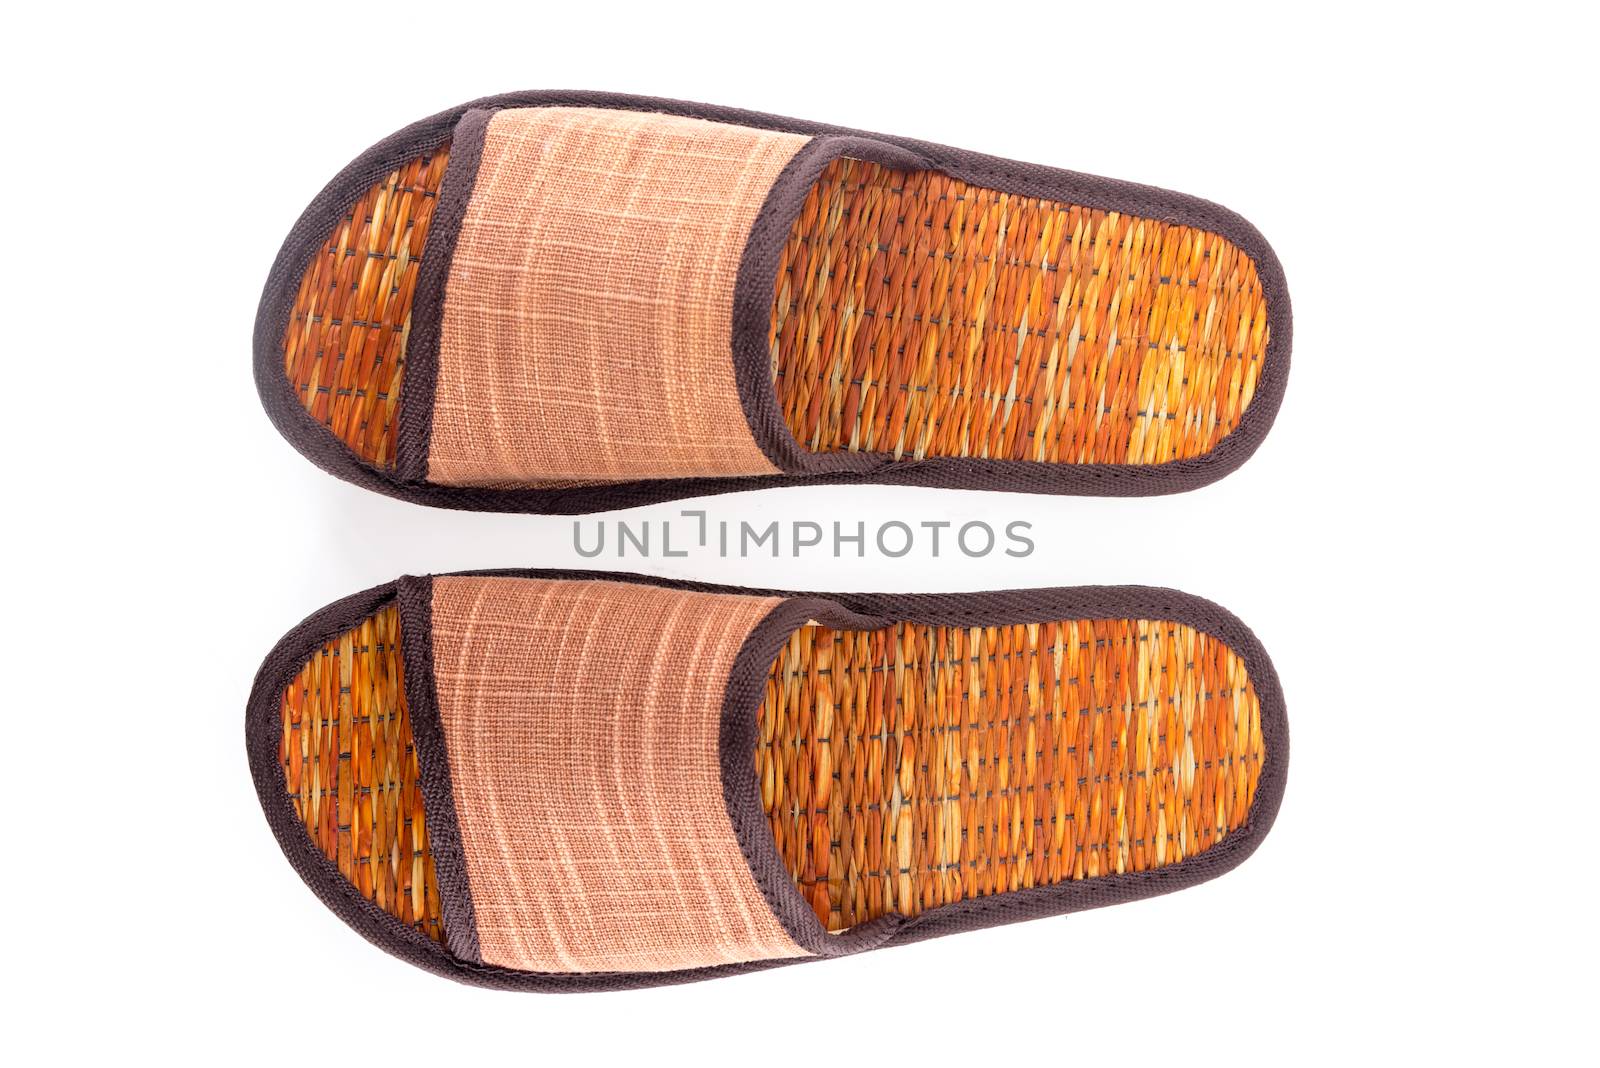 Thai Sandal made from reed plant isolated on white background